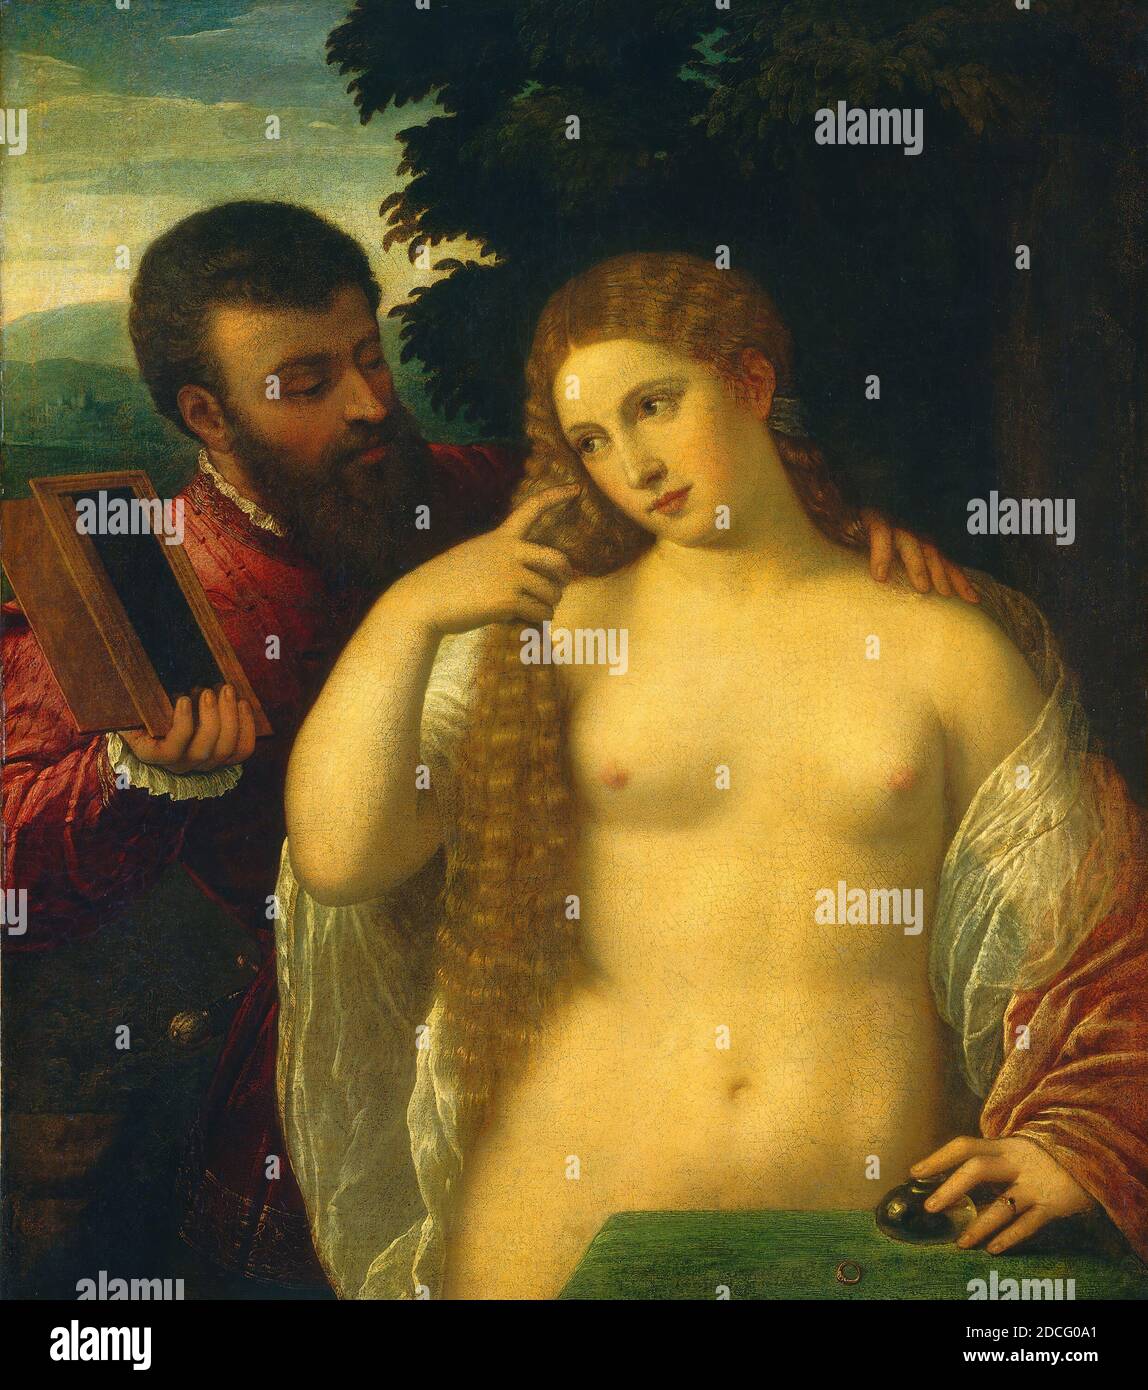 Italian 15th/16th Century, (painter), Titian, (related artist), Venetian, 1488/1490 - 1576, Allegory of Love, c. 1520/1540, oil on canvas, overall: 91.4 x 81.9 cm (36 x 32 1/4 in Stock Photo